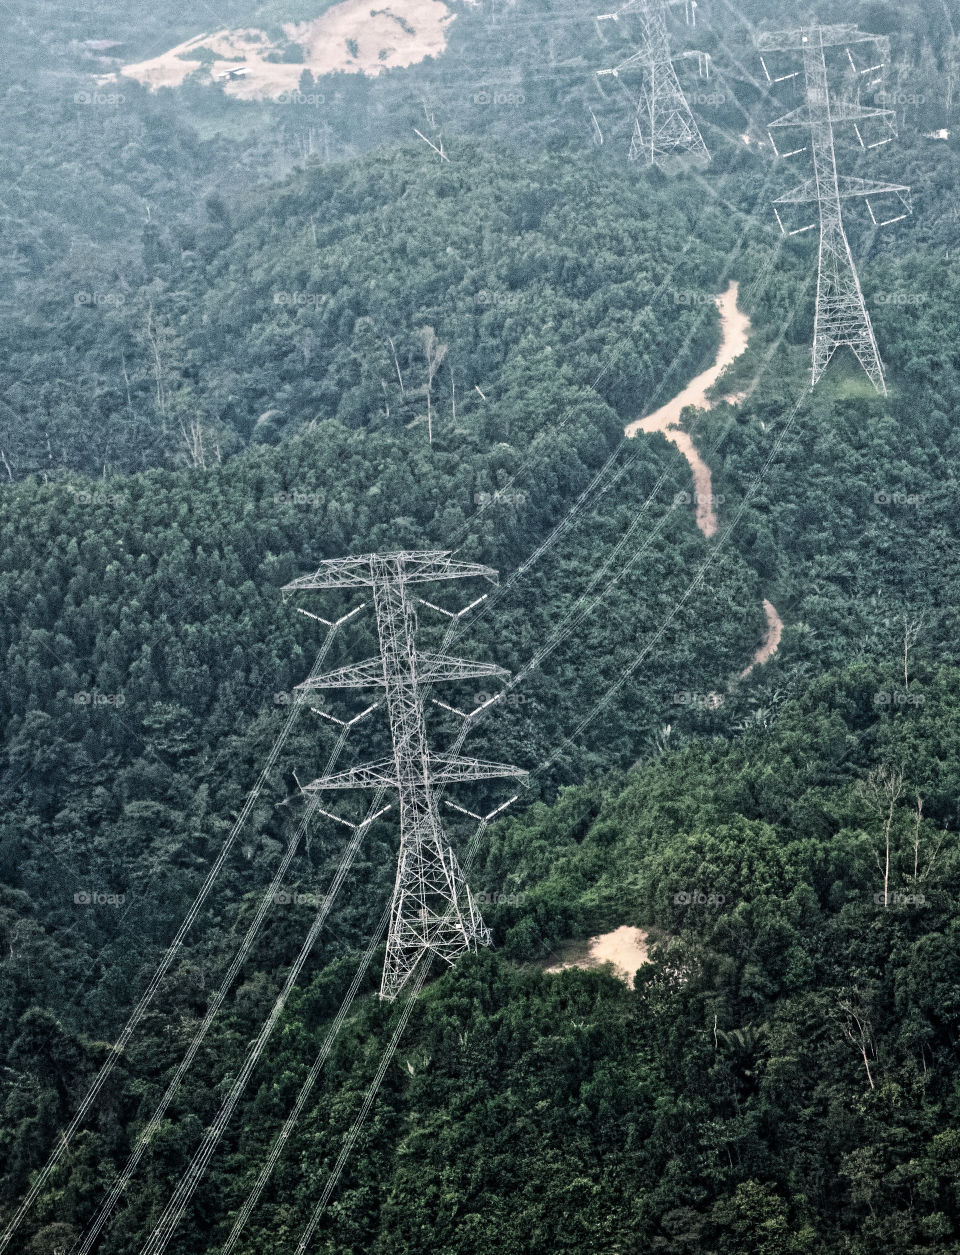 Remote power pylons brings electricity to rural communities